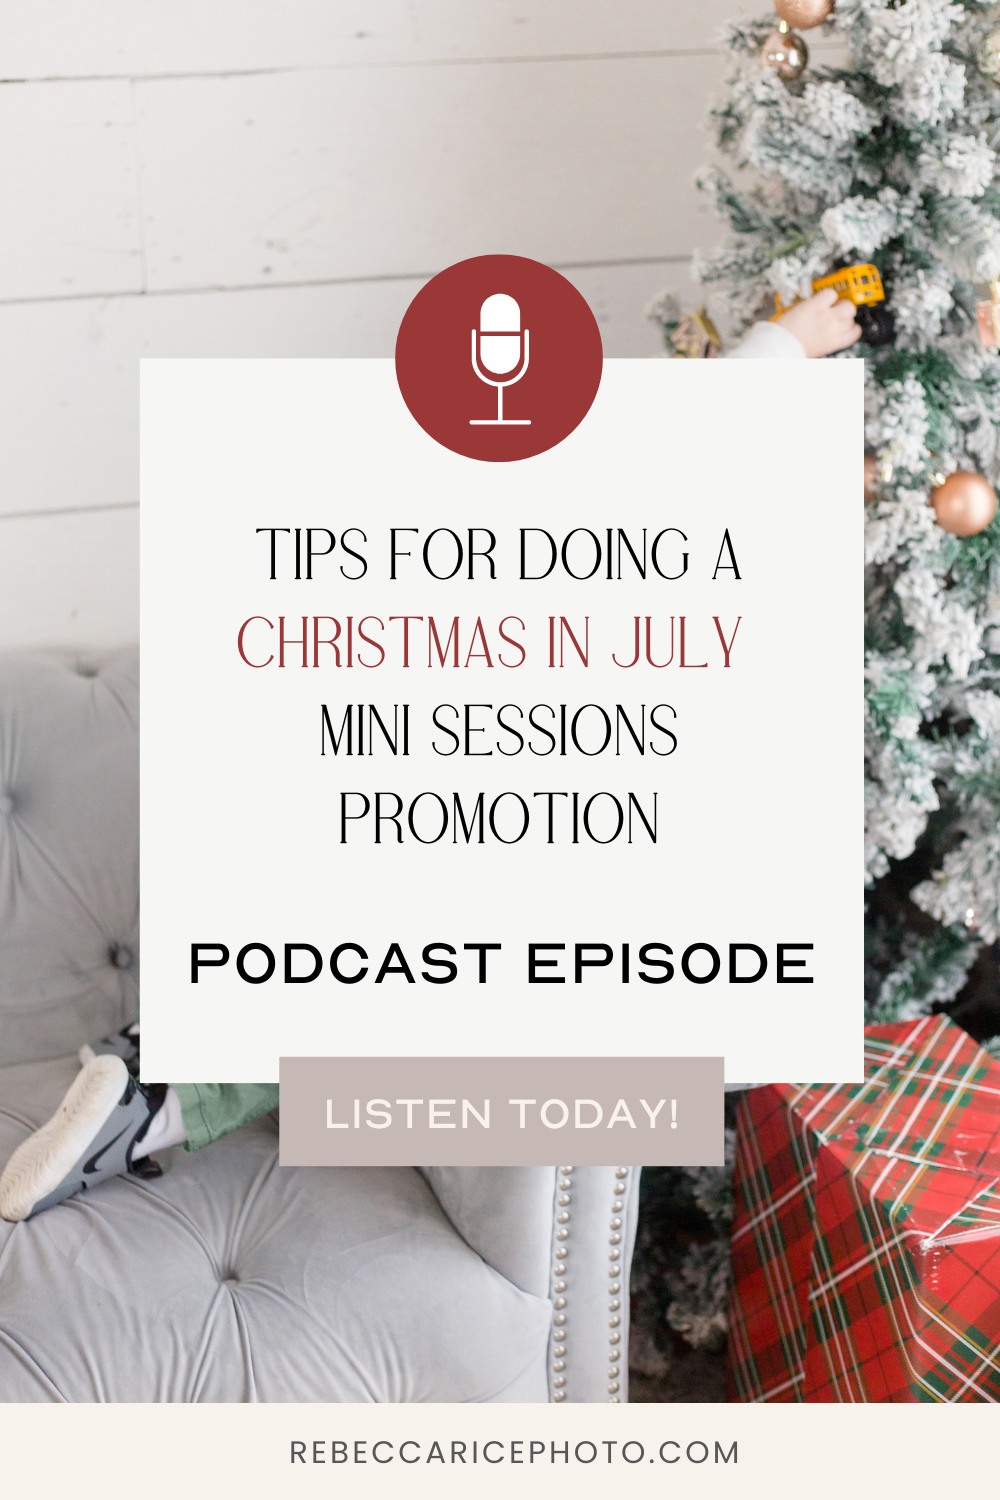 Tips for doing a Christmas in July Mini Sessions Promotion! Click to listen NOW! -rebeccaricephoto.com